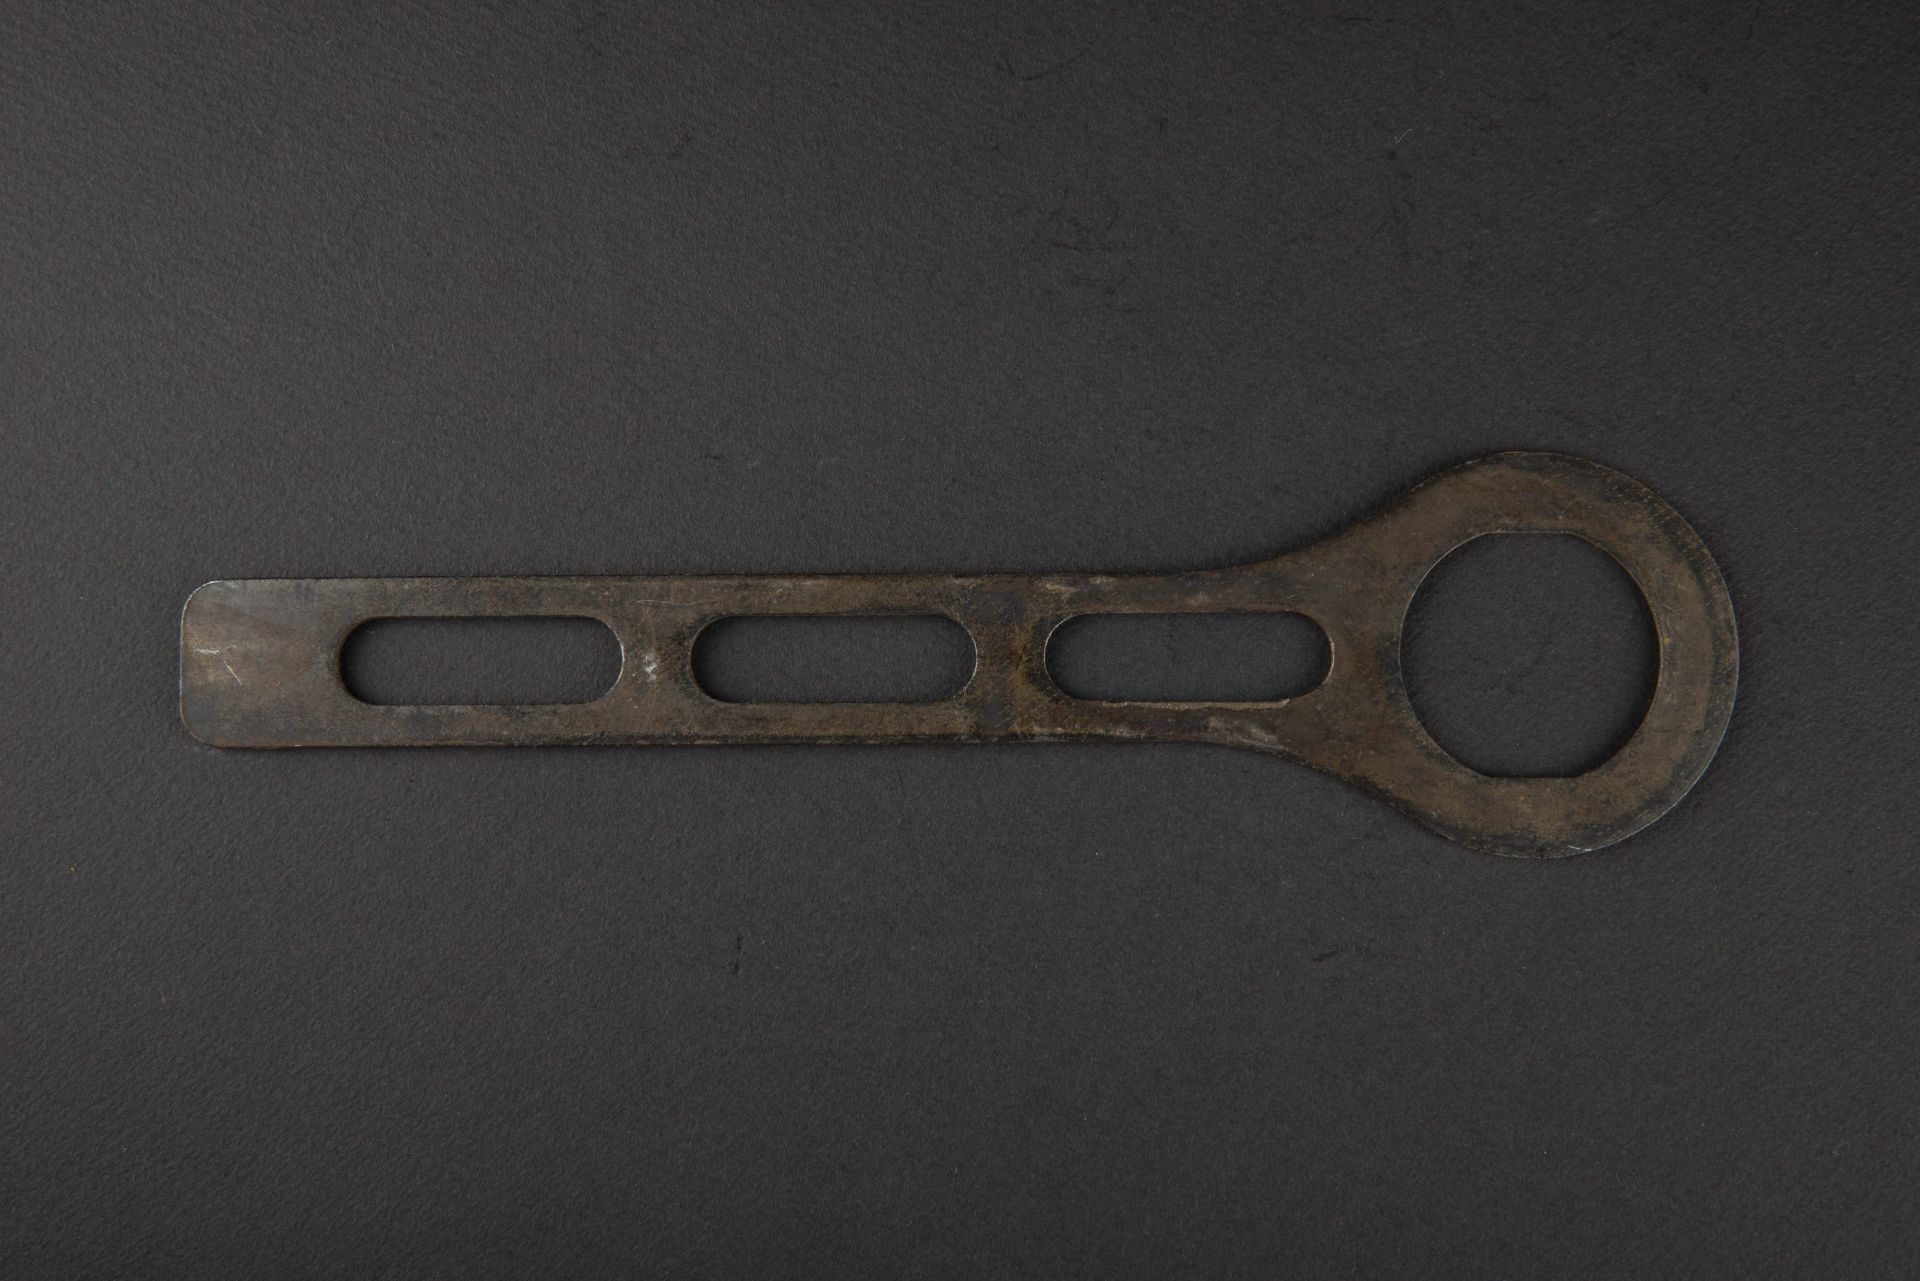 Cle de demontage lance fusee. Rocket launcher disassembly wrench. - Image 2 of 3